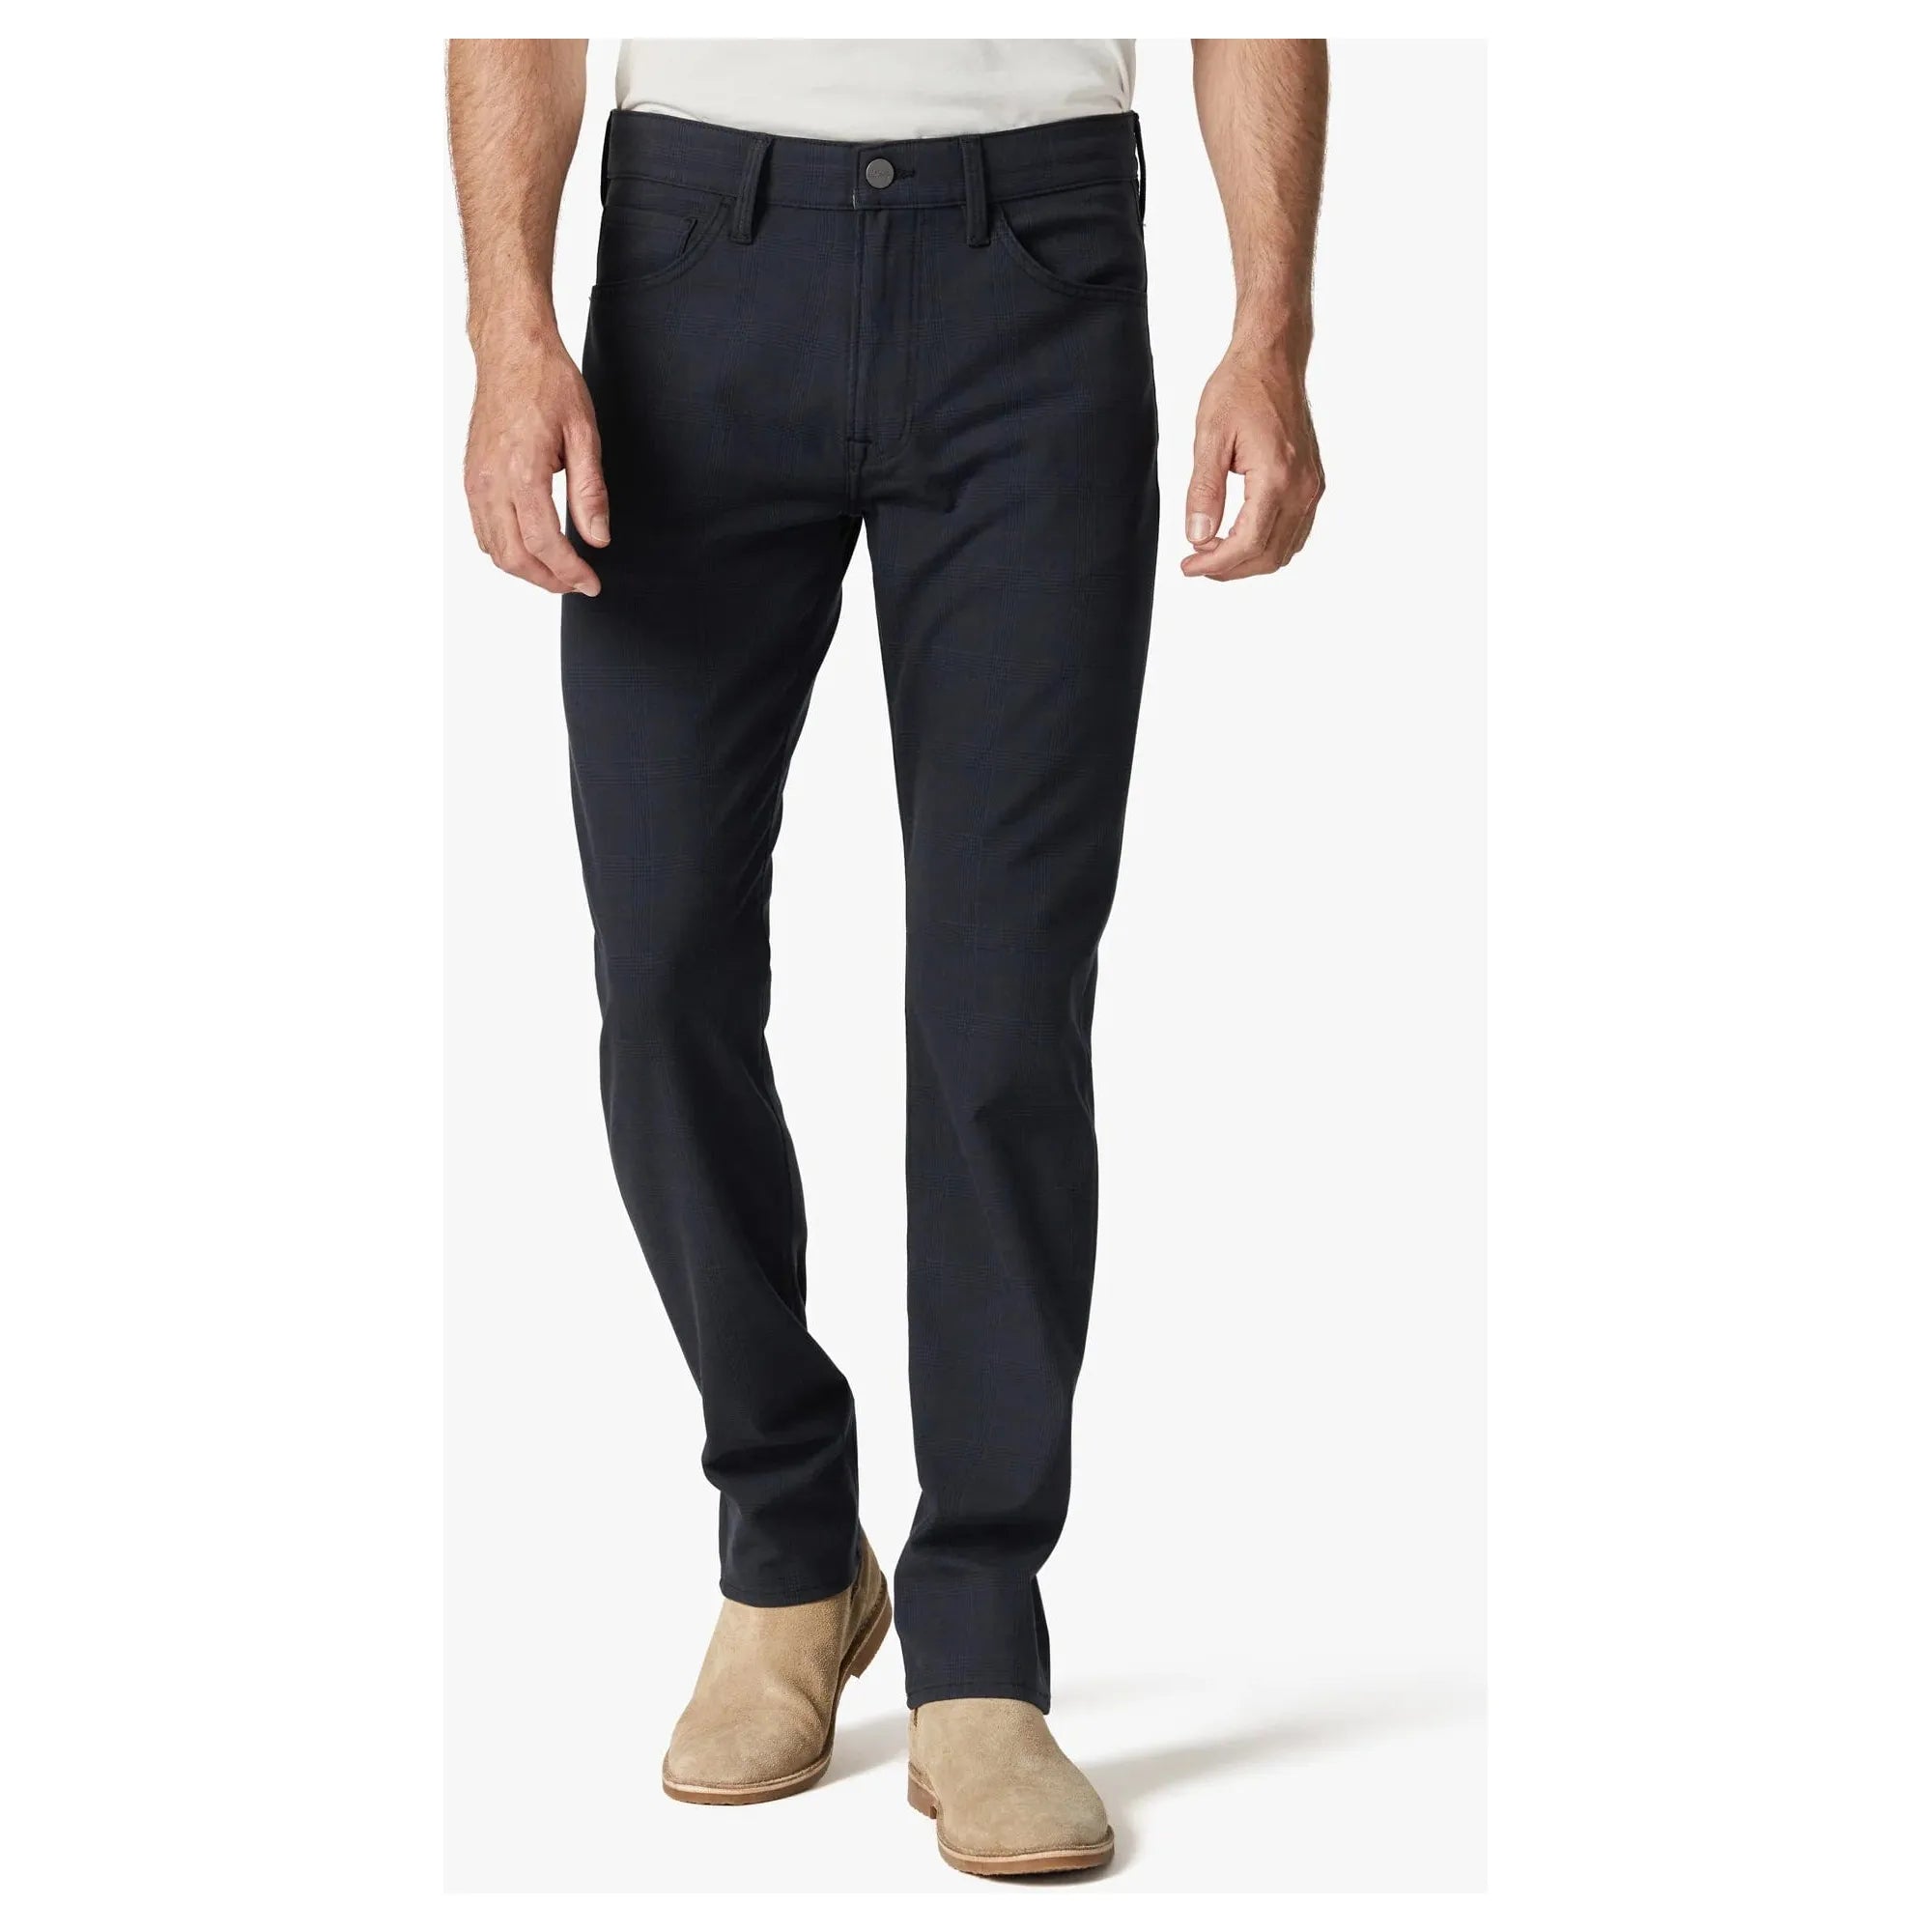 34 Heritage Stories  The Best Men's High Rise Jeans: Our Charisma Fit  Explained – 34 Heritage Canada